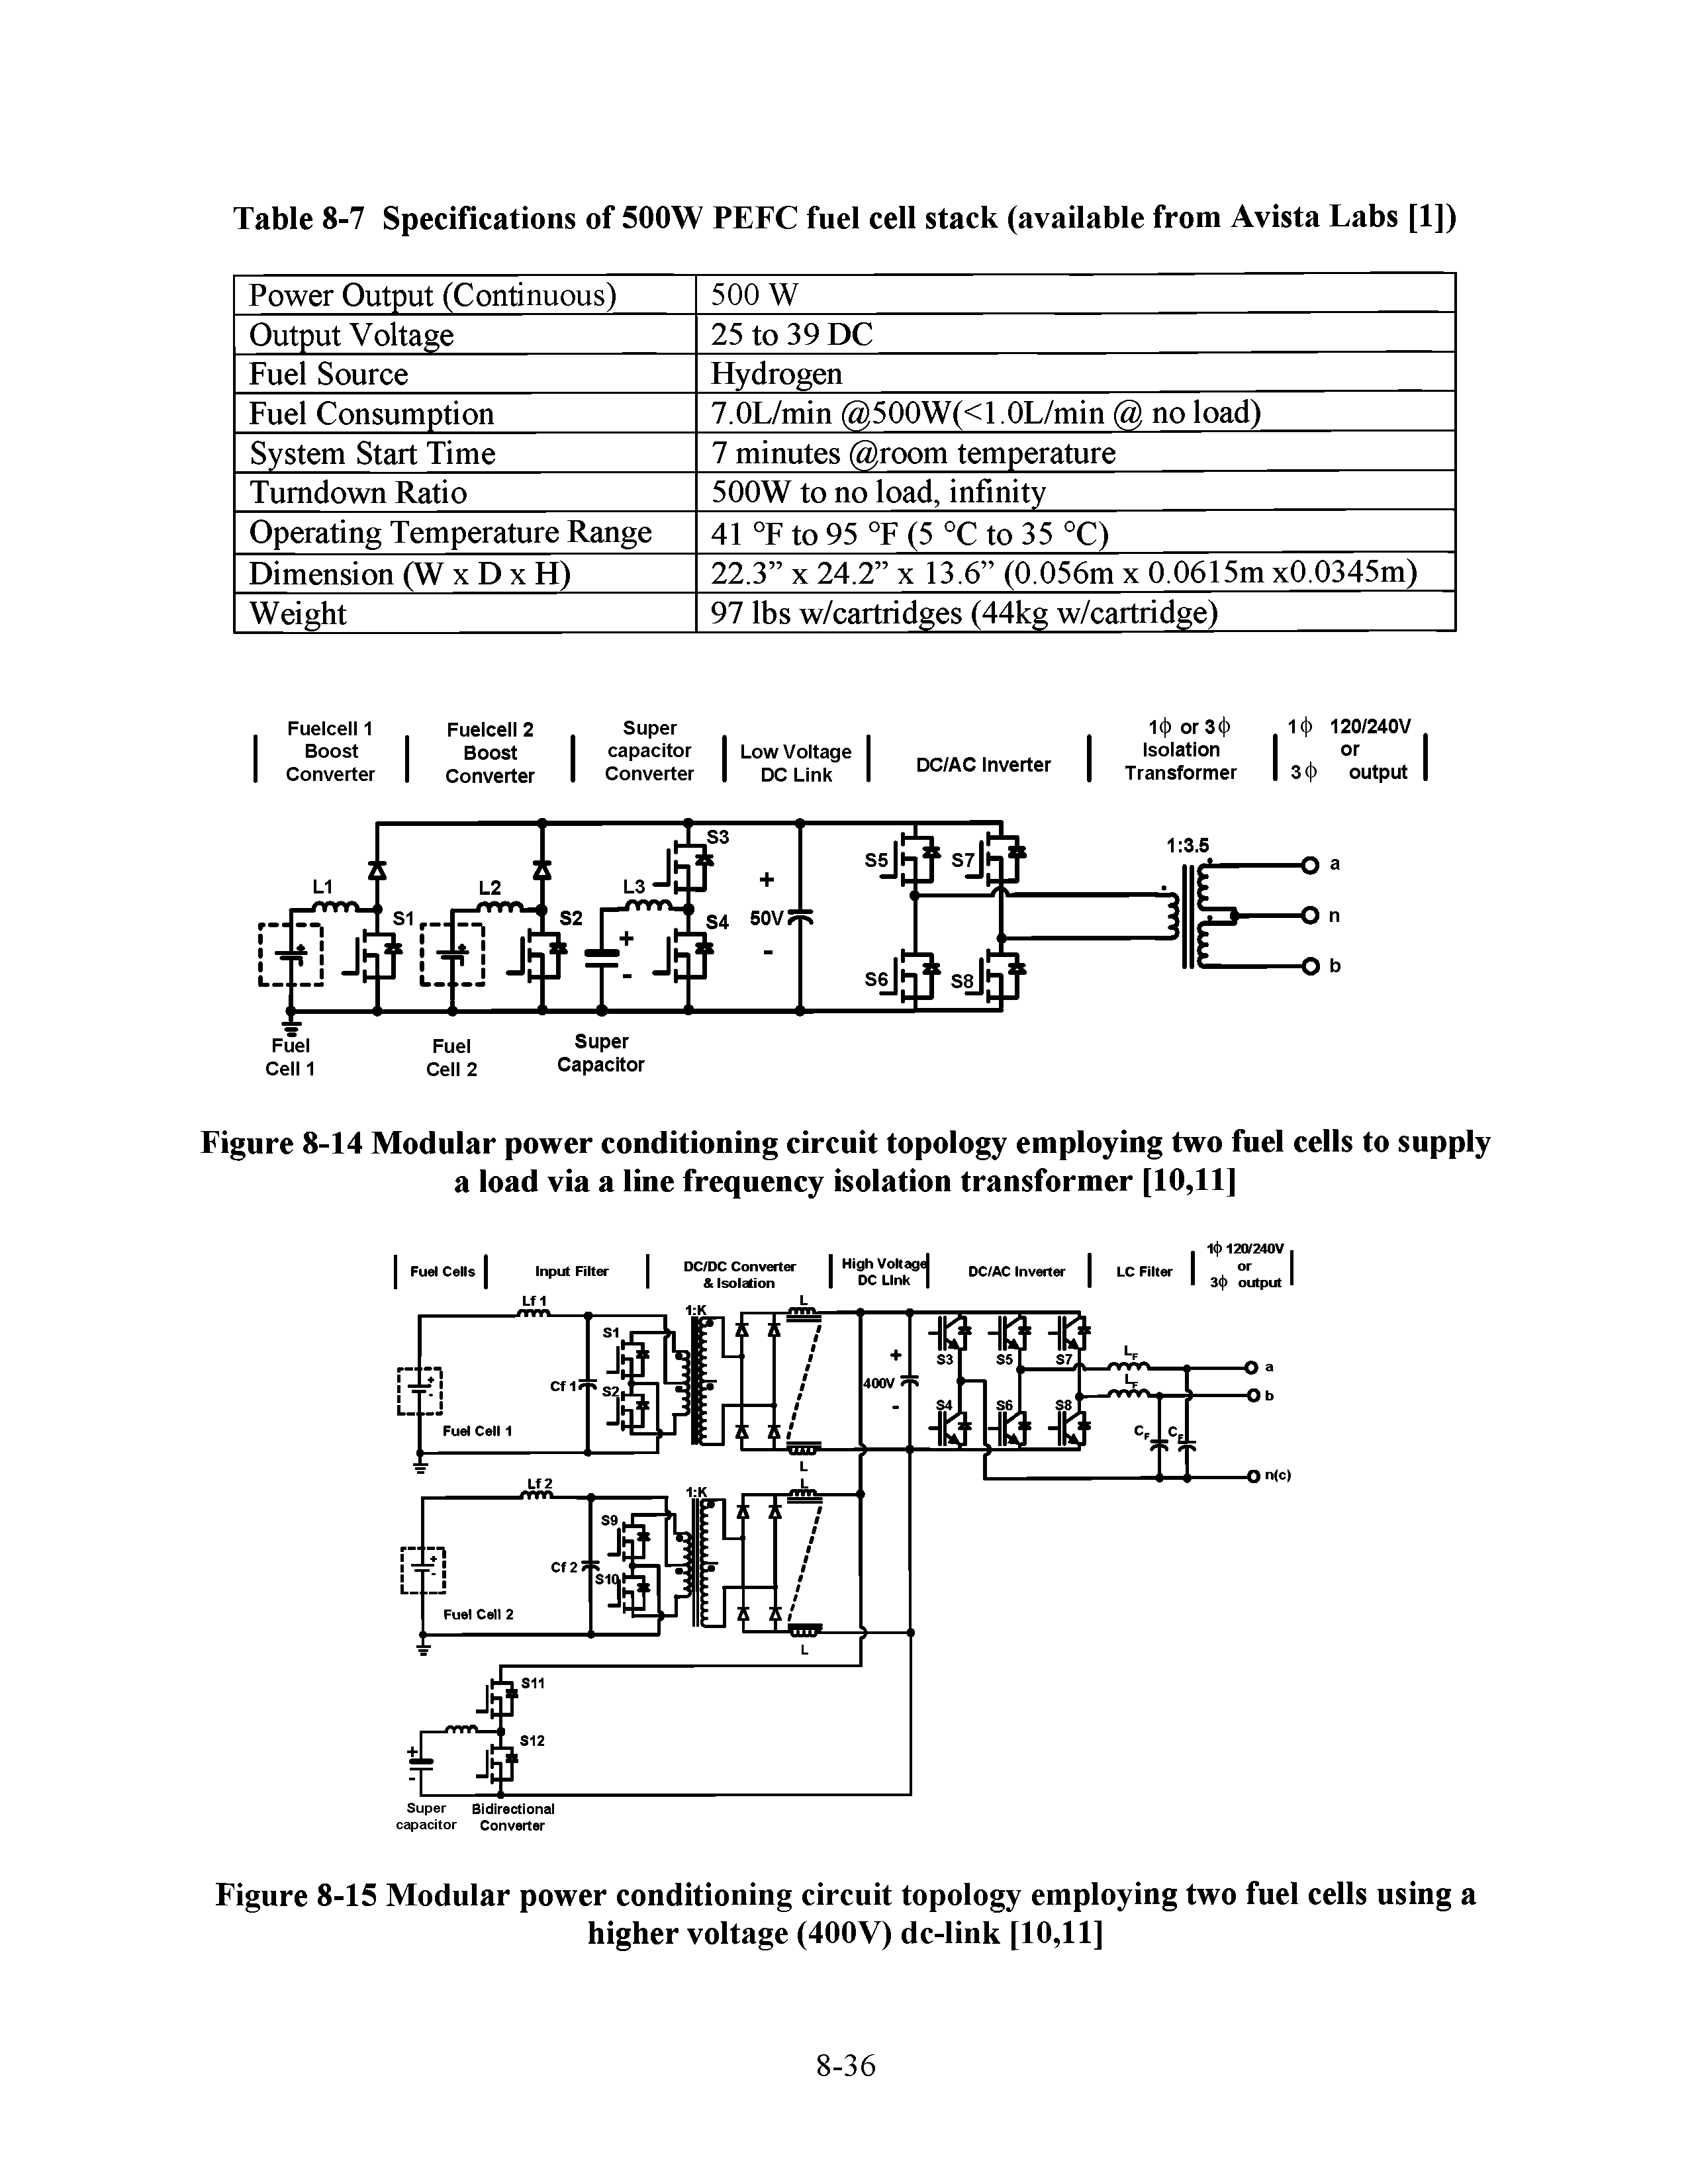 Figure 8-14 Modular power conditioning circuit topology employing two fuel cells to supply a load via a line frequency isolation transformer [10,11]...